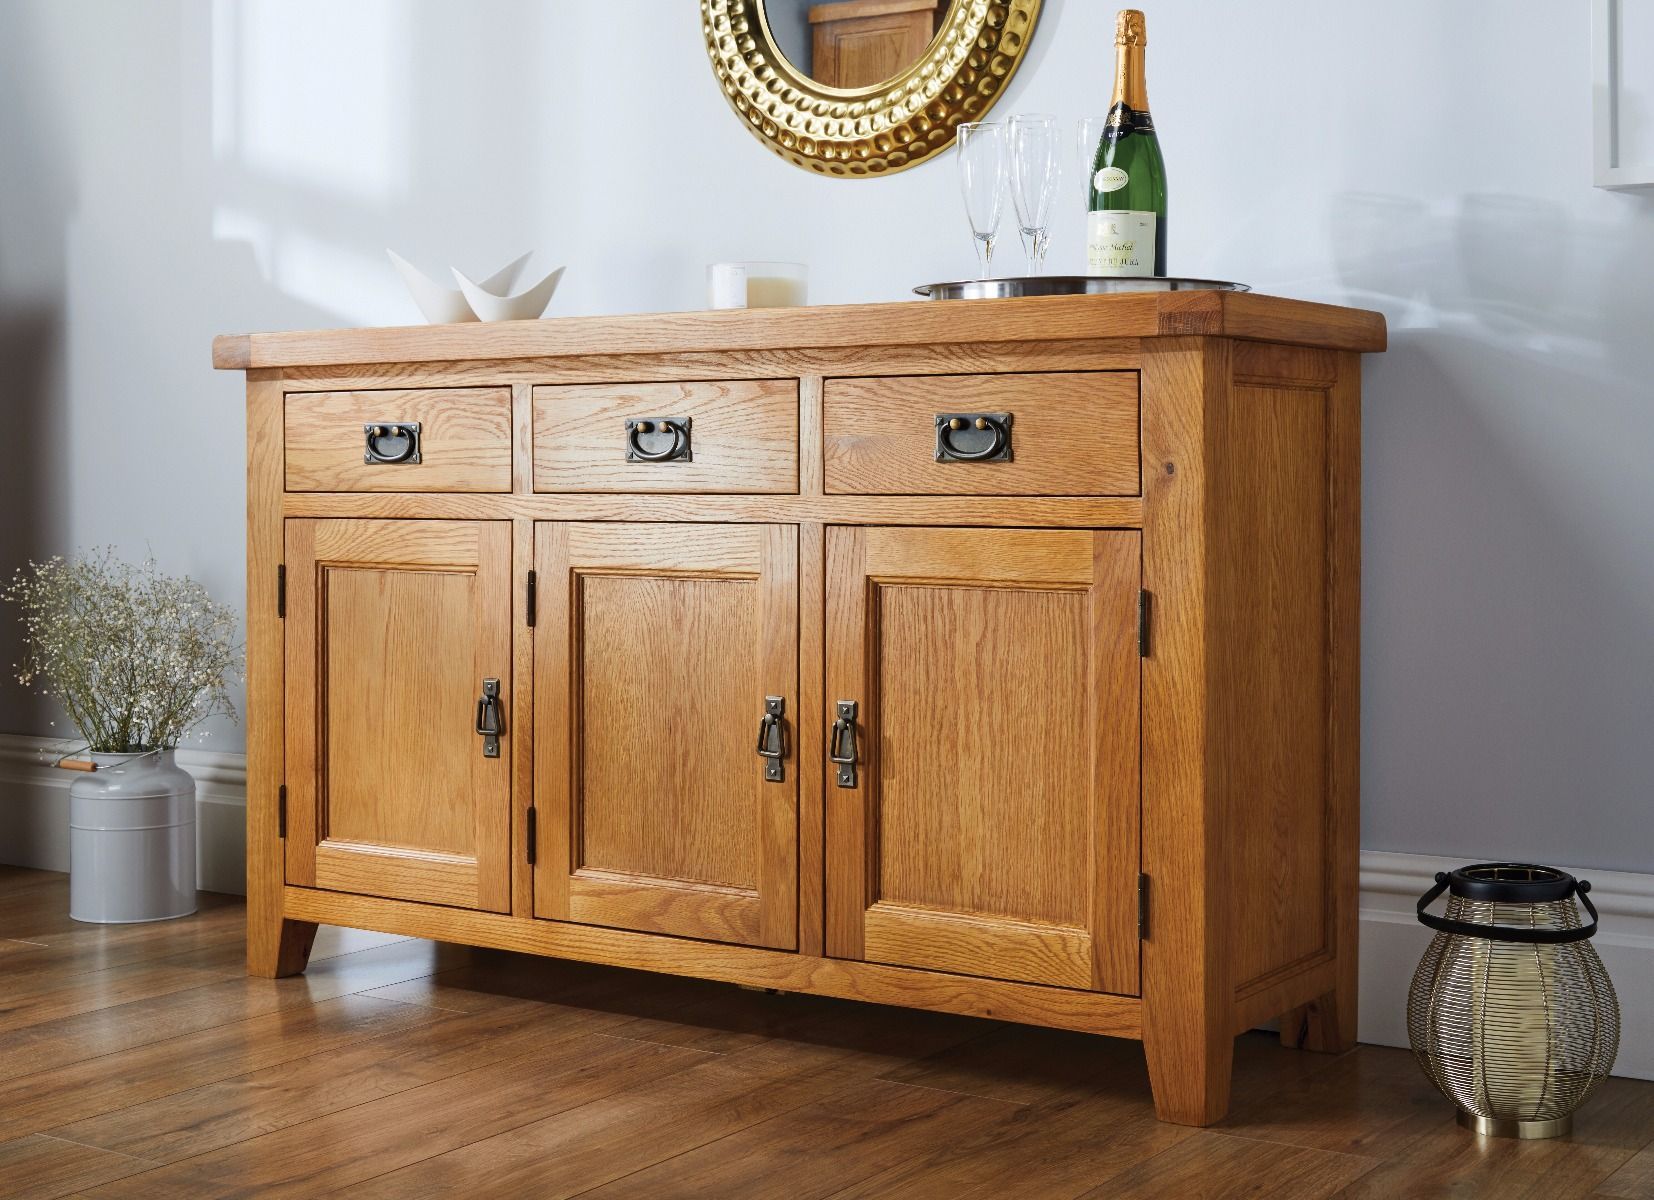 Country Oak Rustic 3 Door Medium Sized Sideboard – Free Delivery | Top  Furniture With Regard To Rustic Oak Sideboards (View 7 of 15)